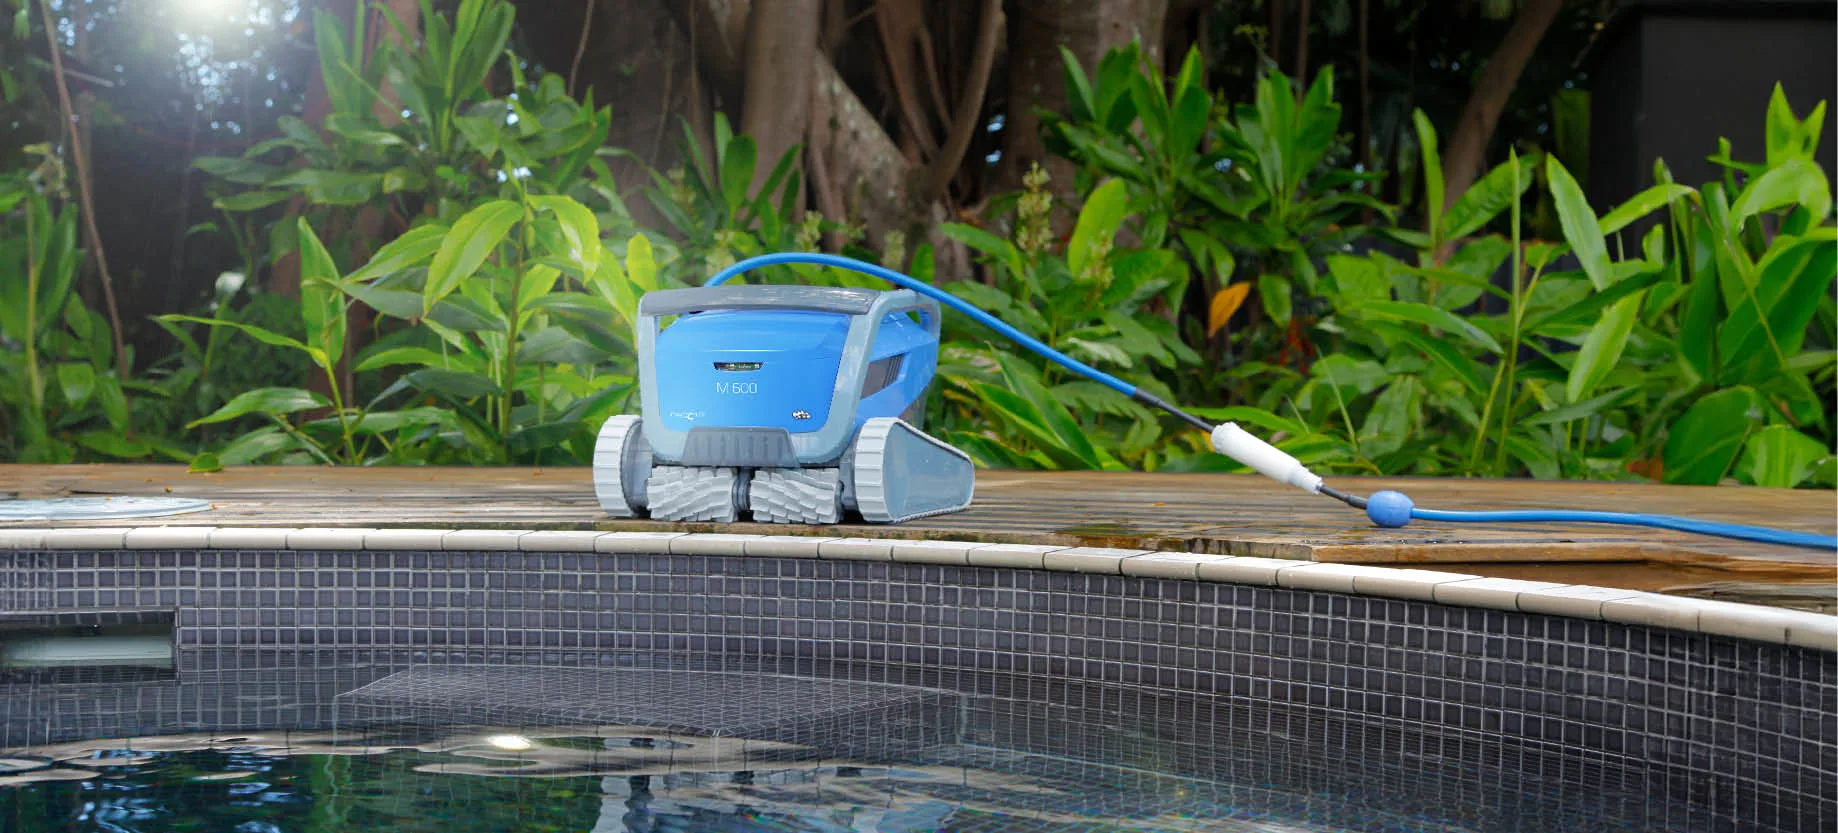 M600 a top-of-the-range solution for pool maintenance